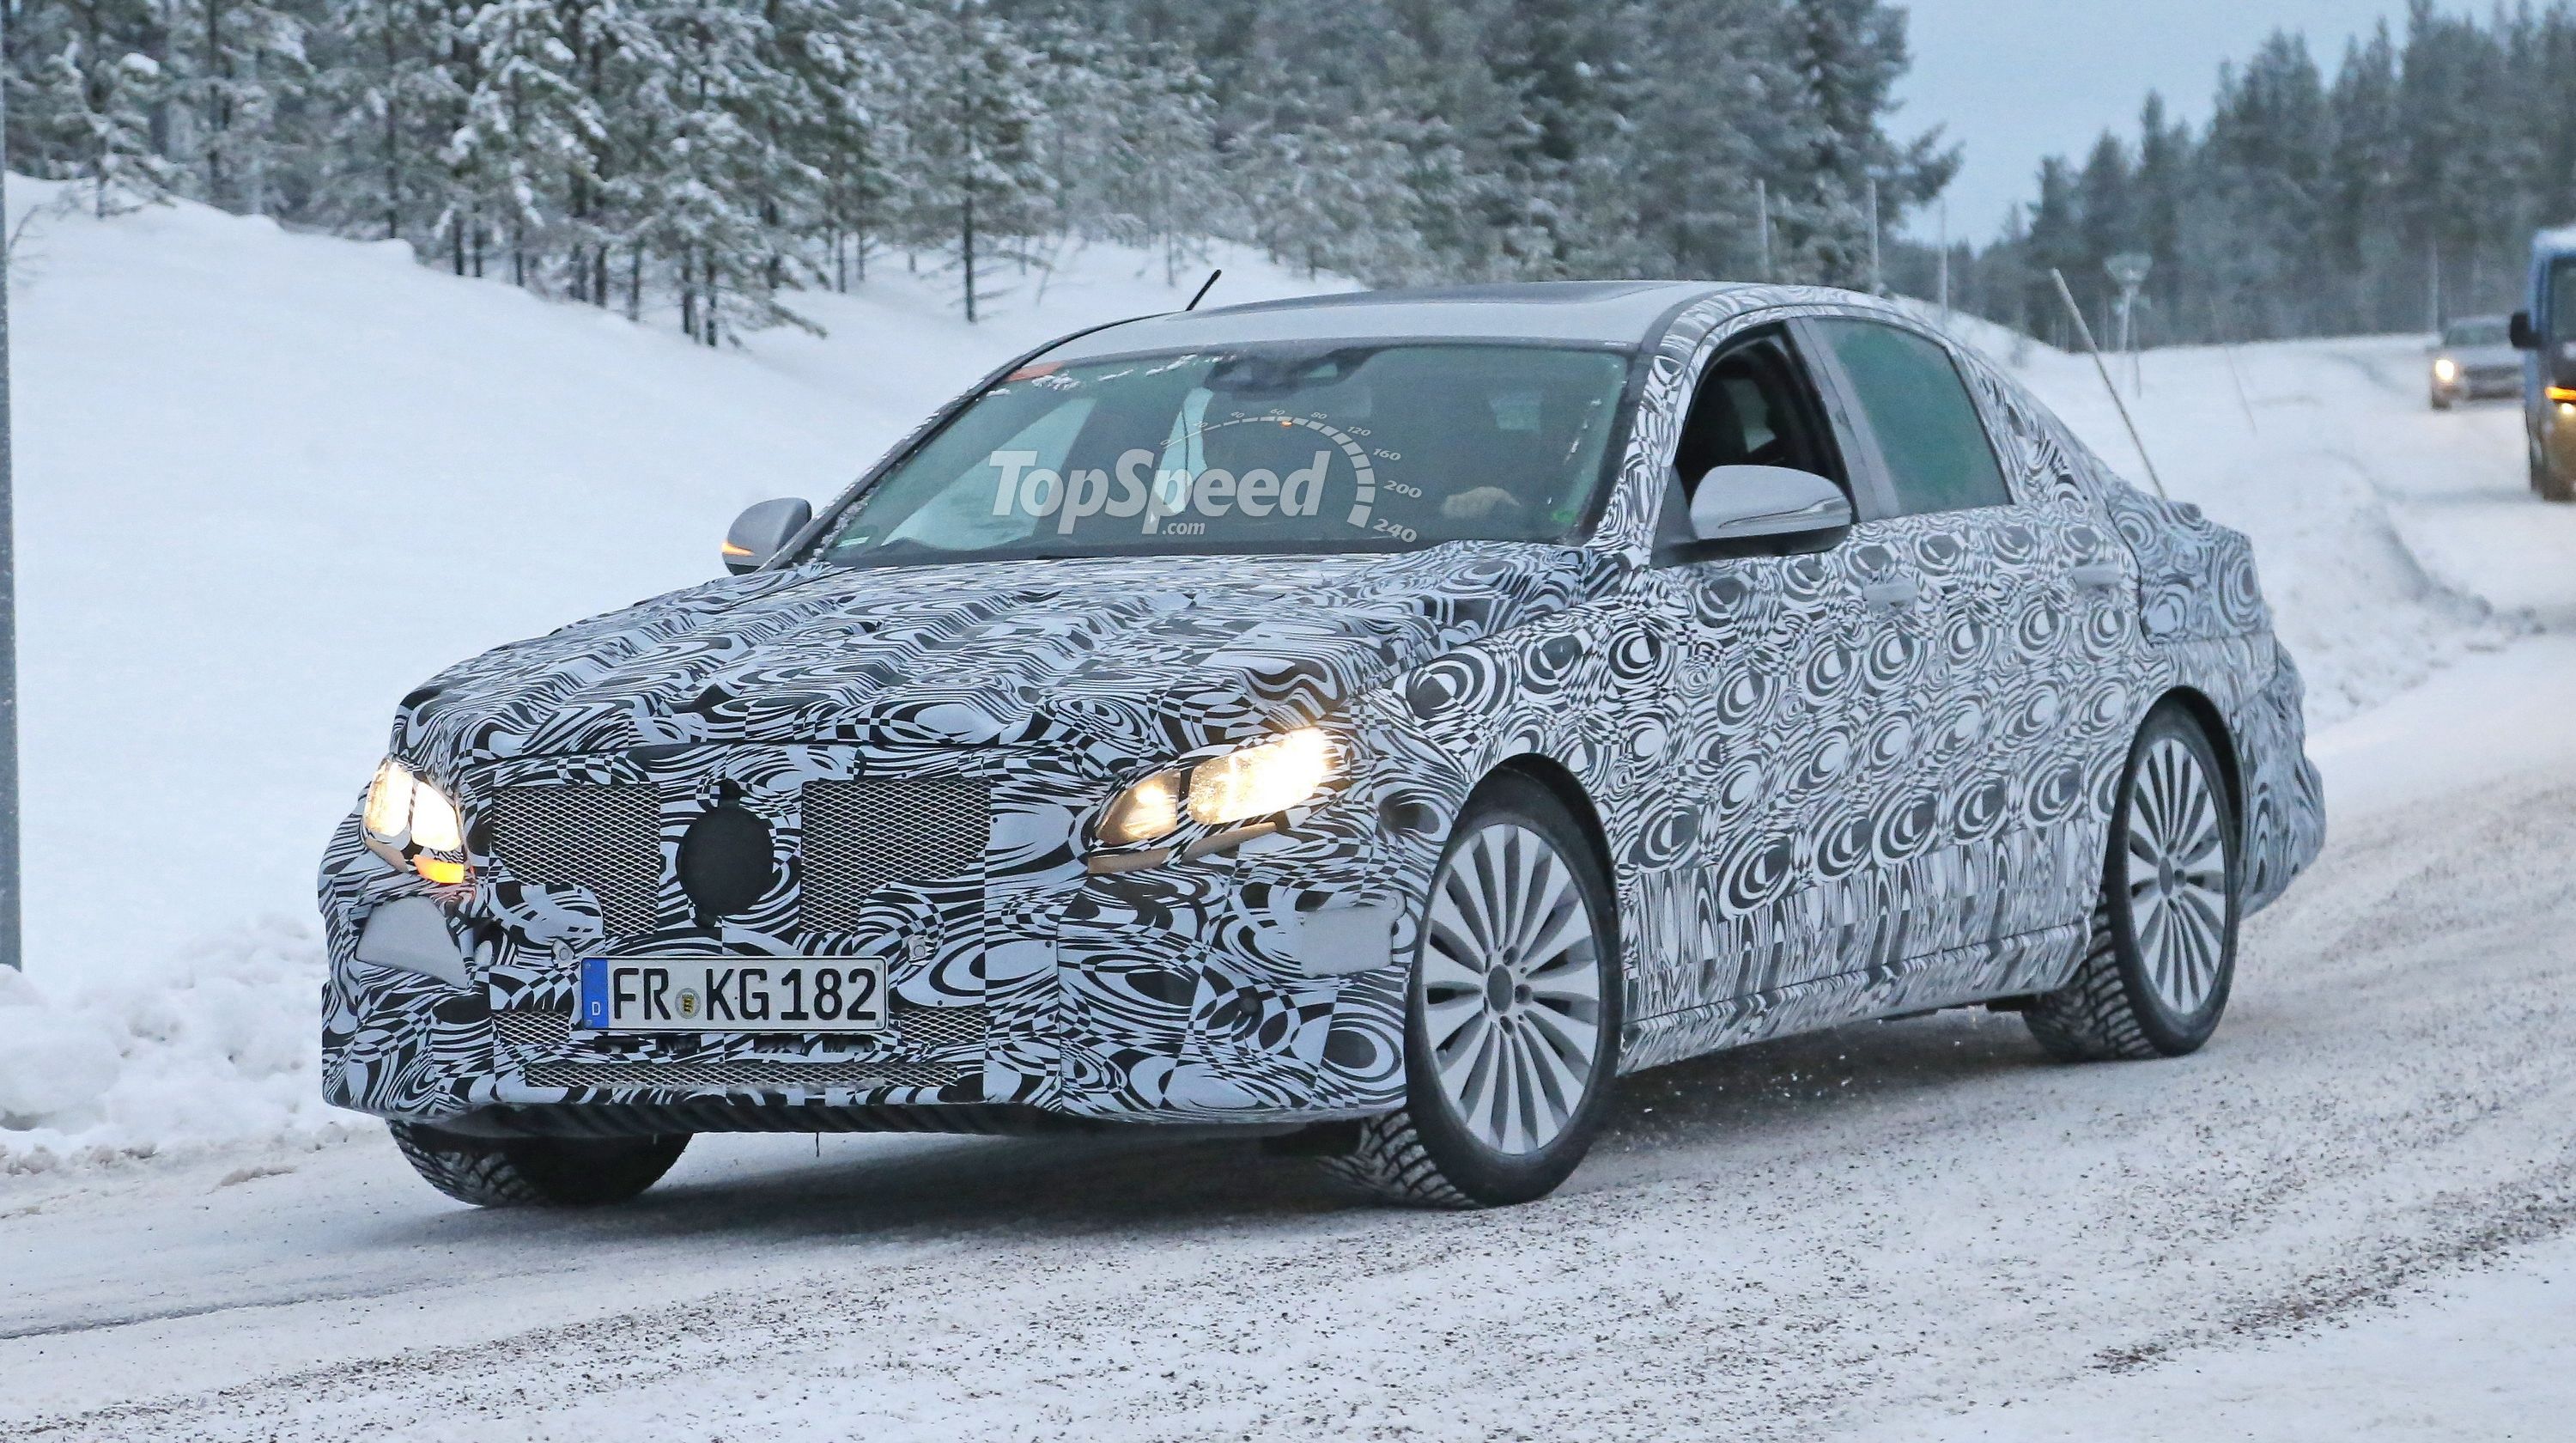  Our spy photographers caught the E-Class Plug-n Hybrid out for a test run. Check out the images and our speculative preview of the upcoming model at TopSpeed.com.